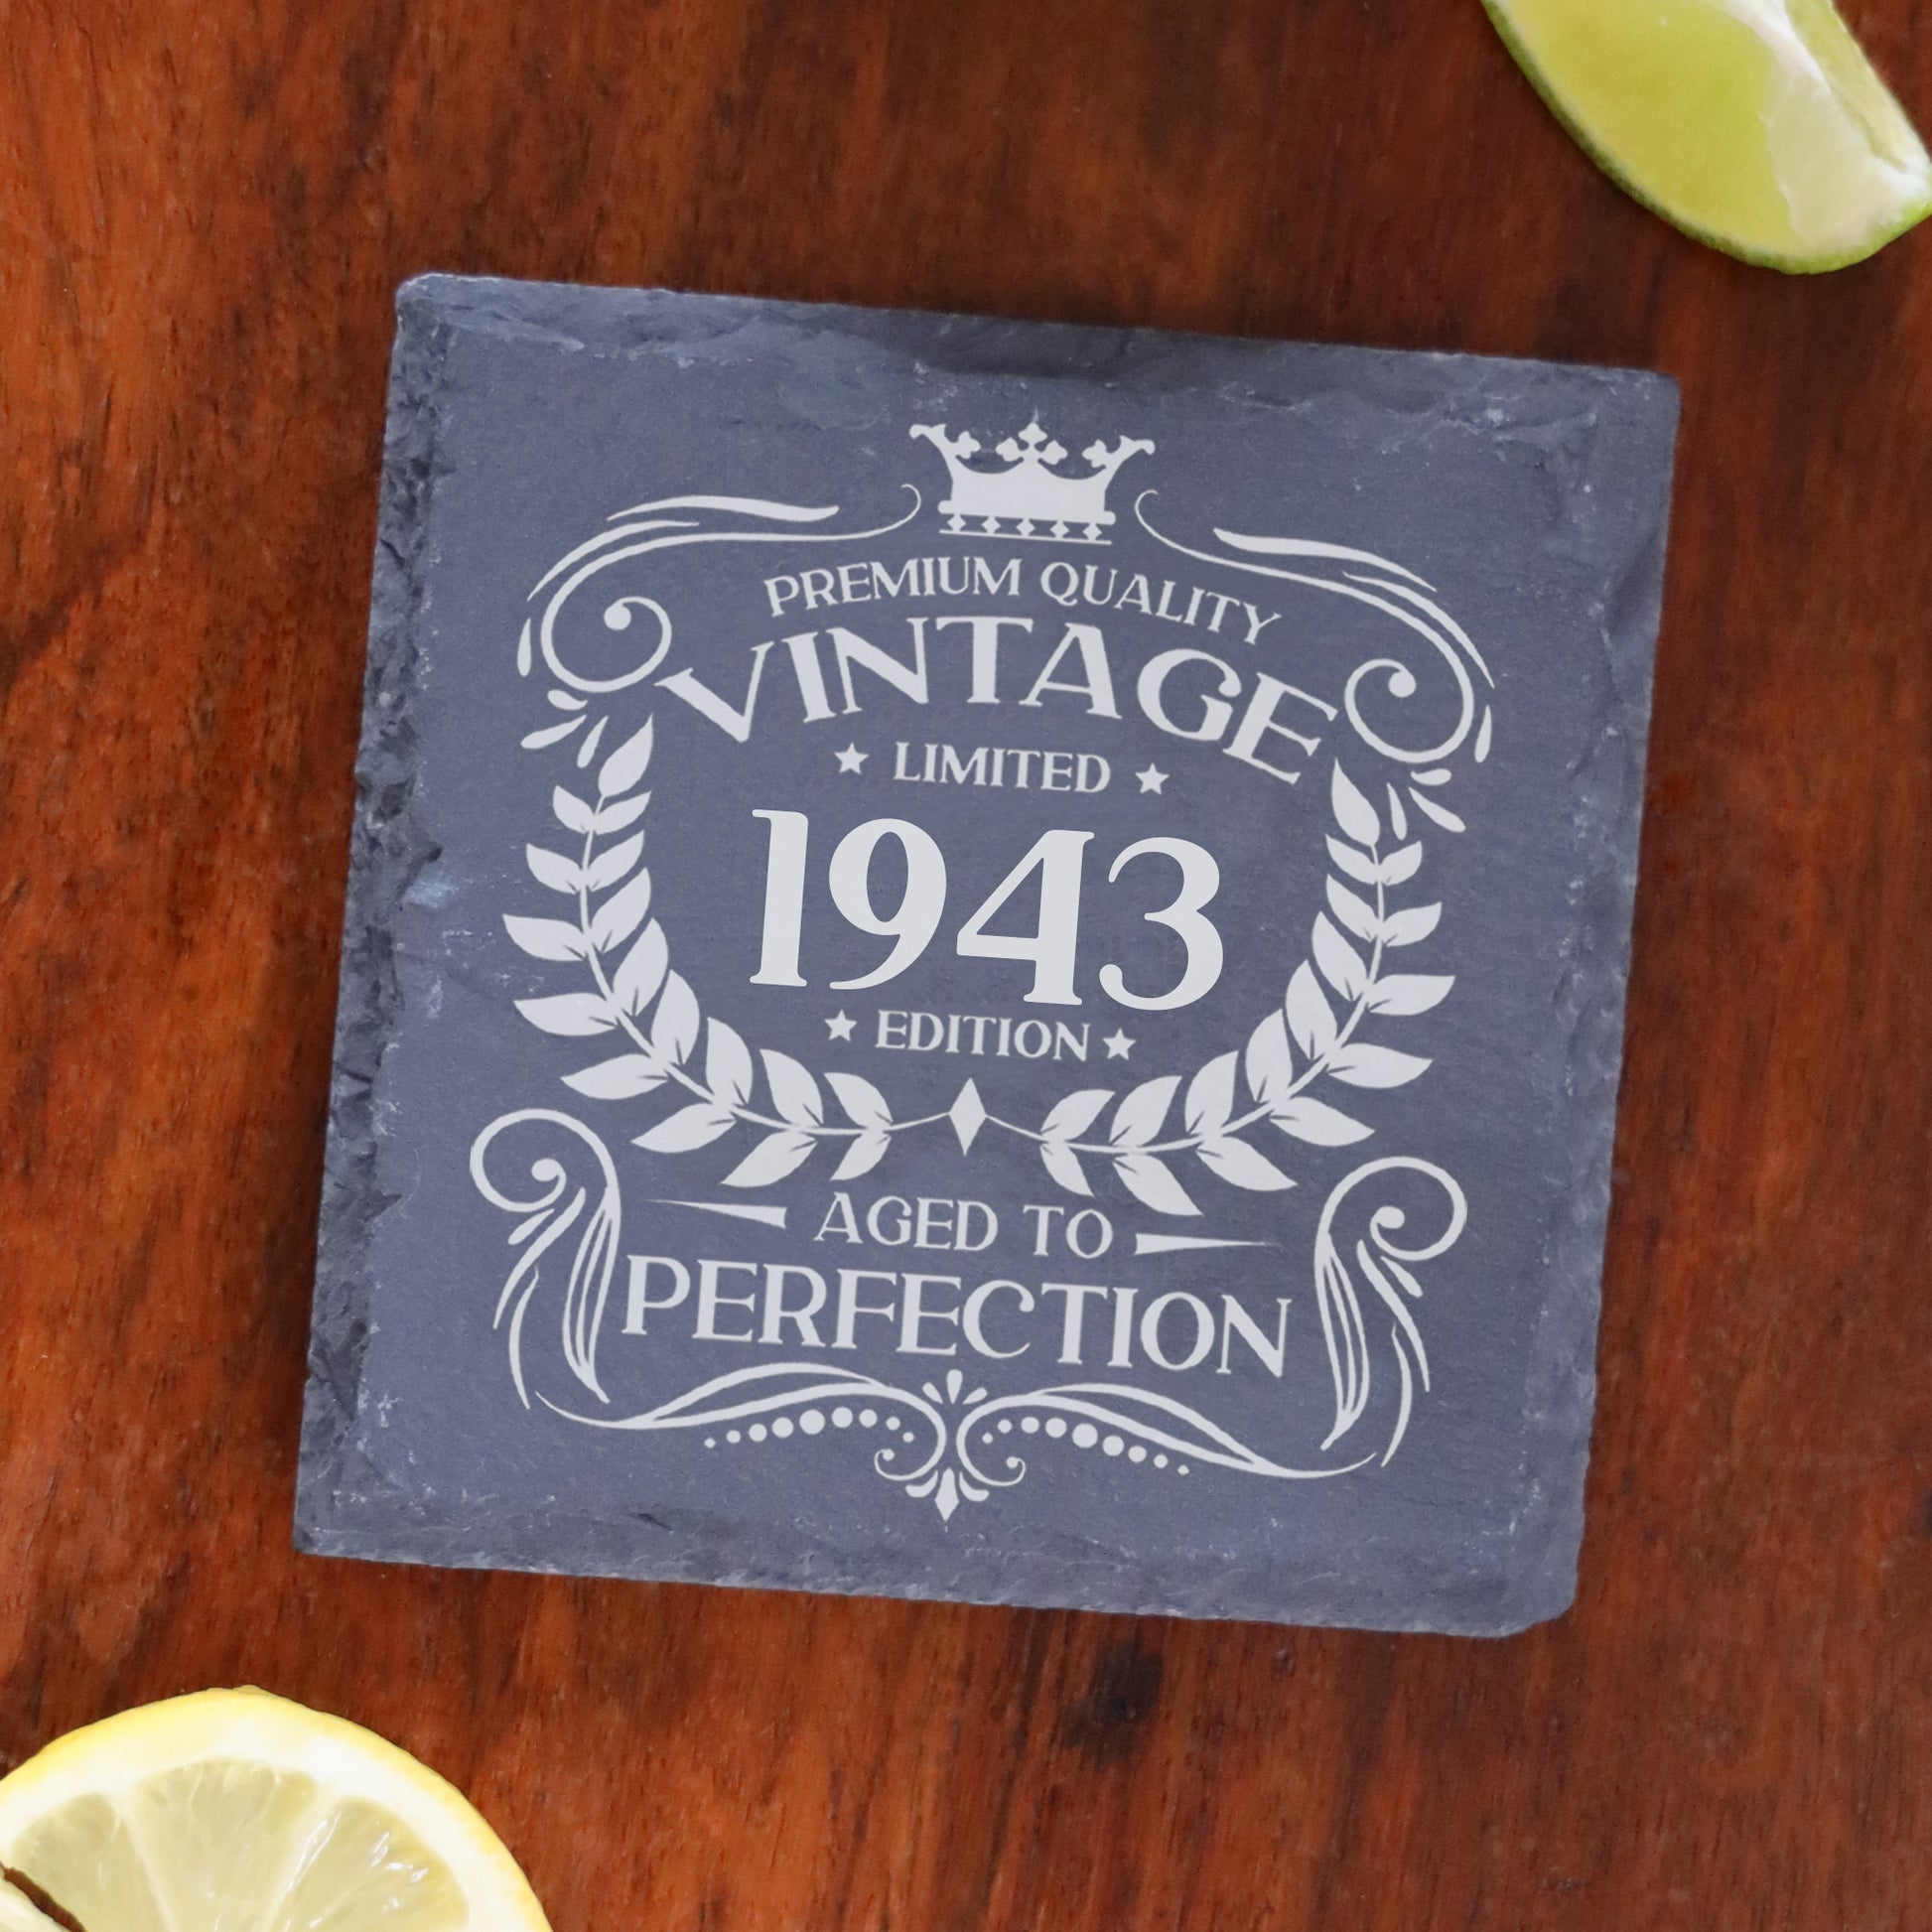 Vintage 1943 80th Birthday Engraved Gin Glass Gift  - Always Looking Good - Square Coaster Only  